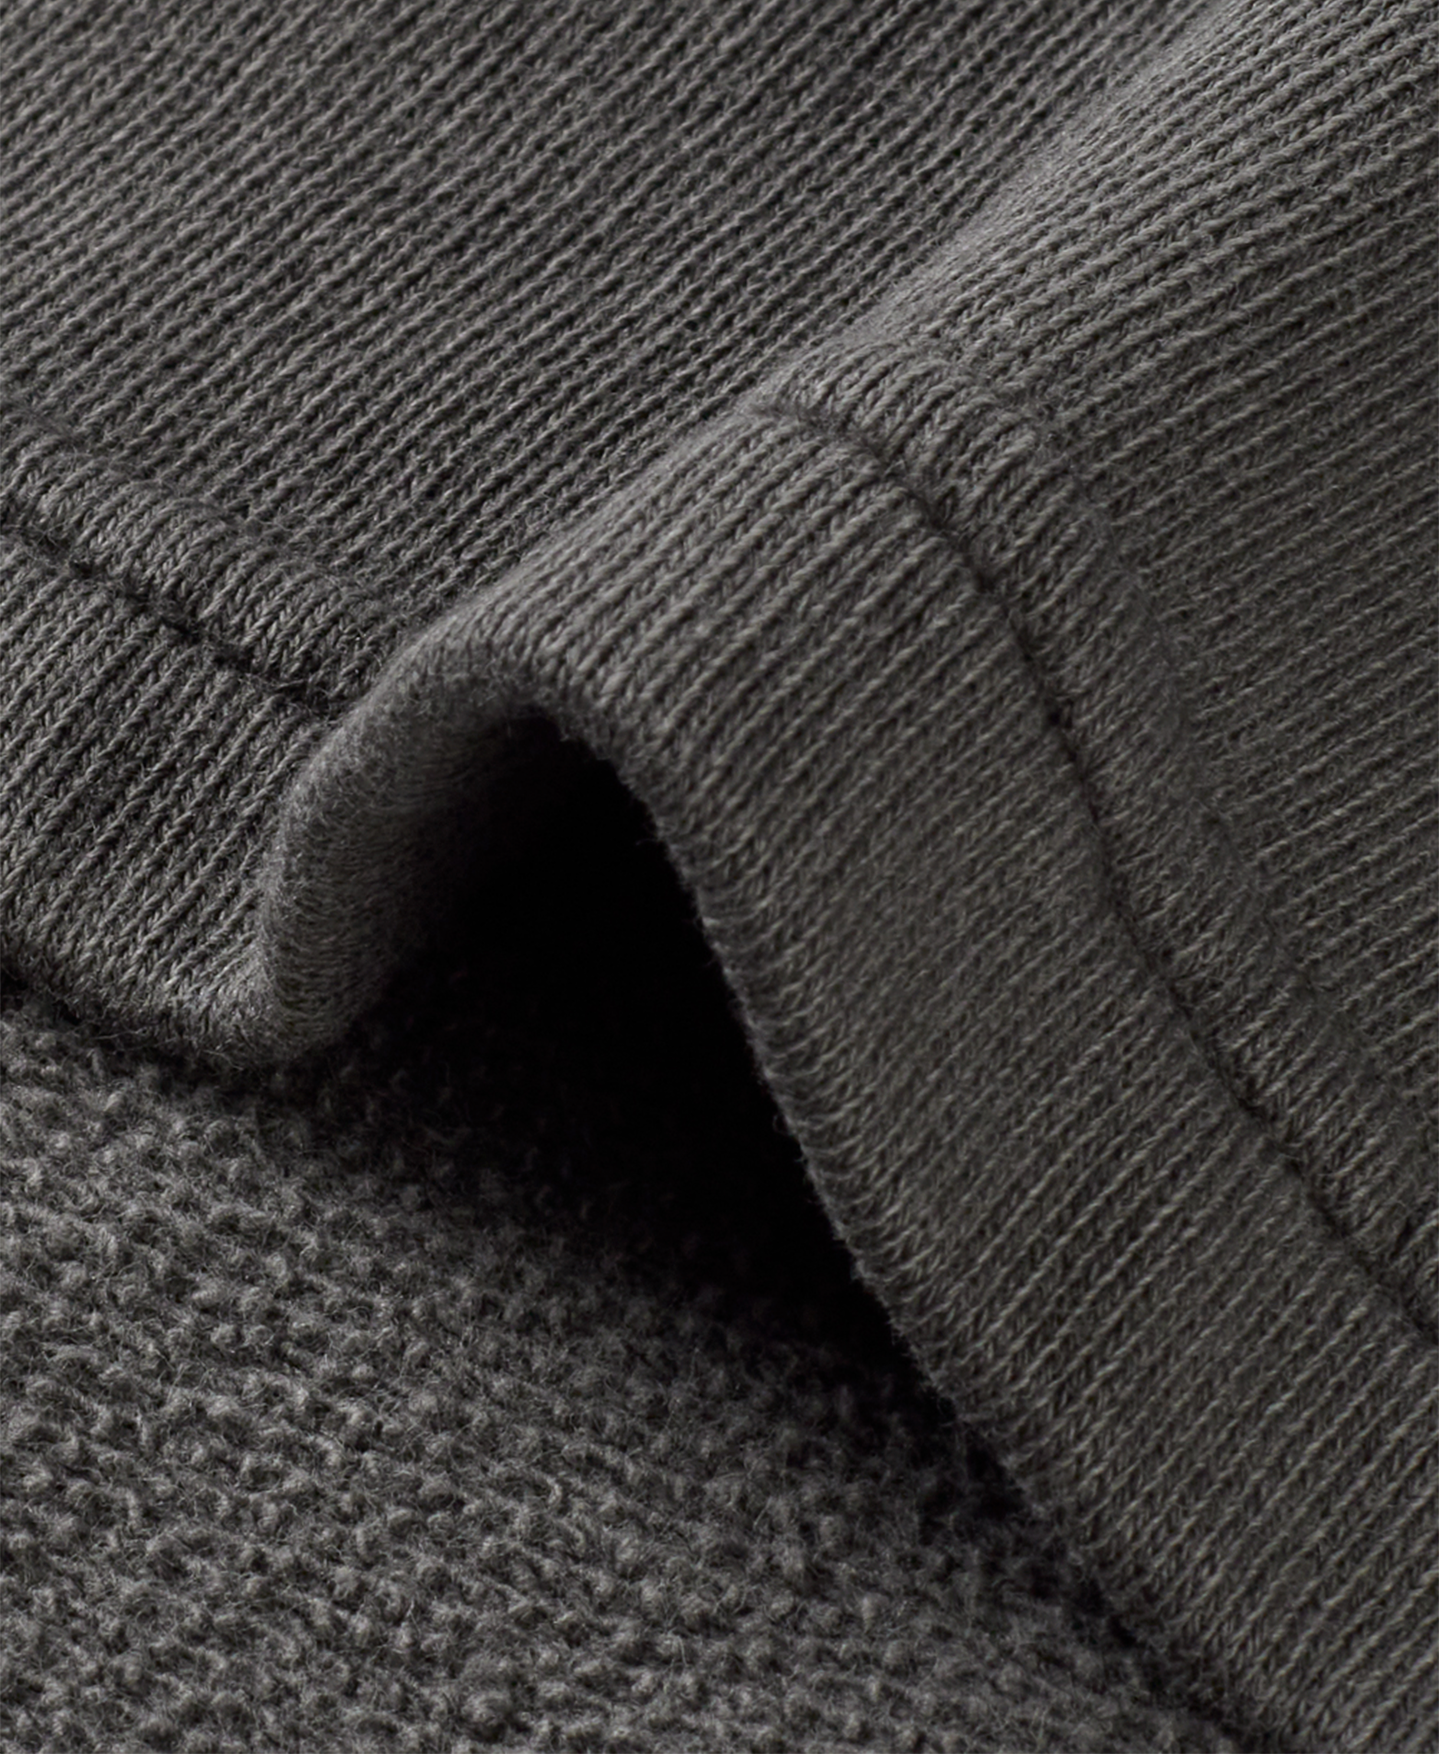 350 GSM 'Anthracite' Short Pants